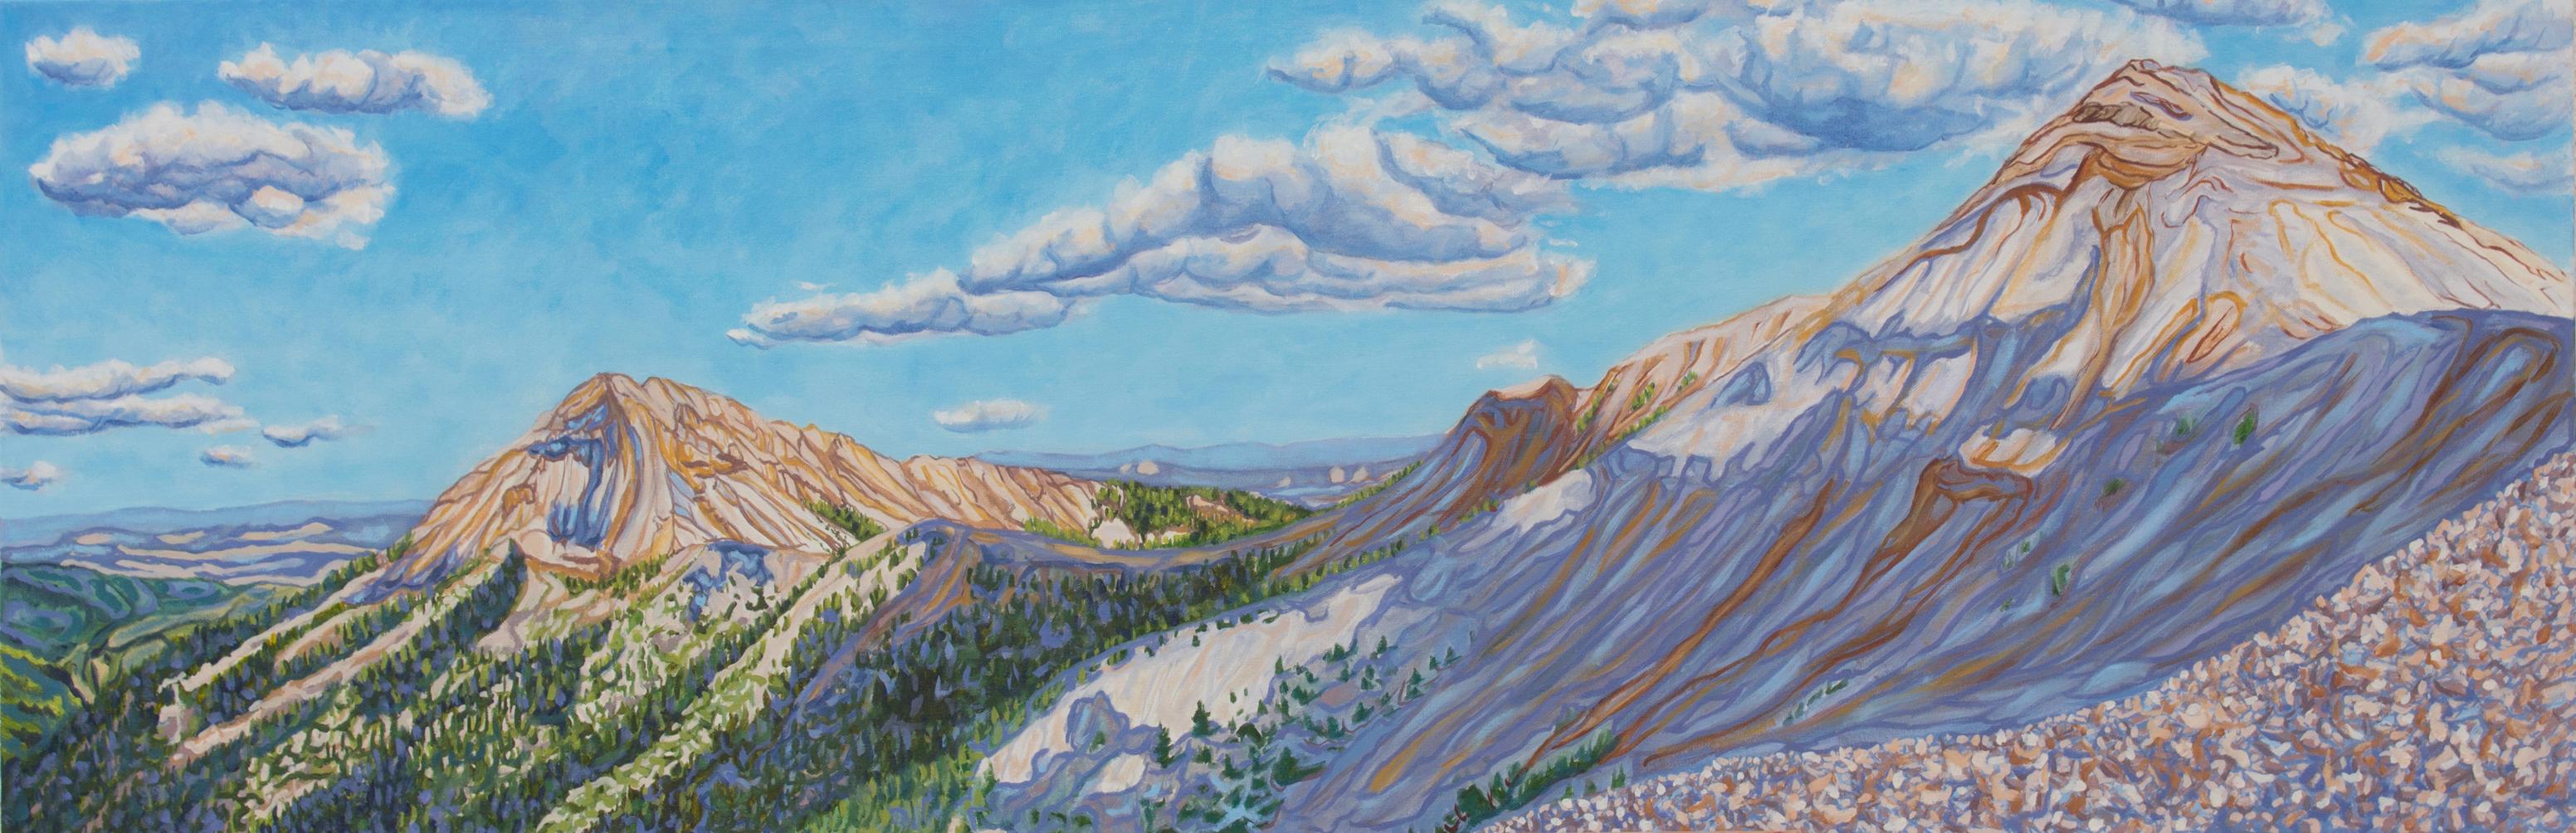 Mountains and Skyshadows, Oil Painting - Art by Crystal DiPietro